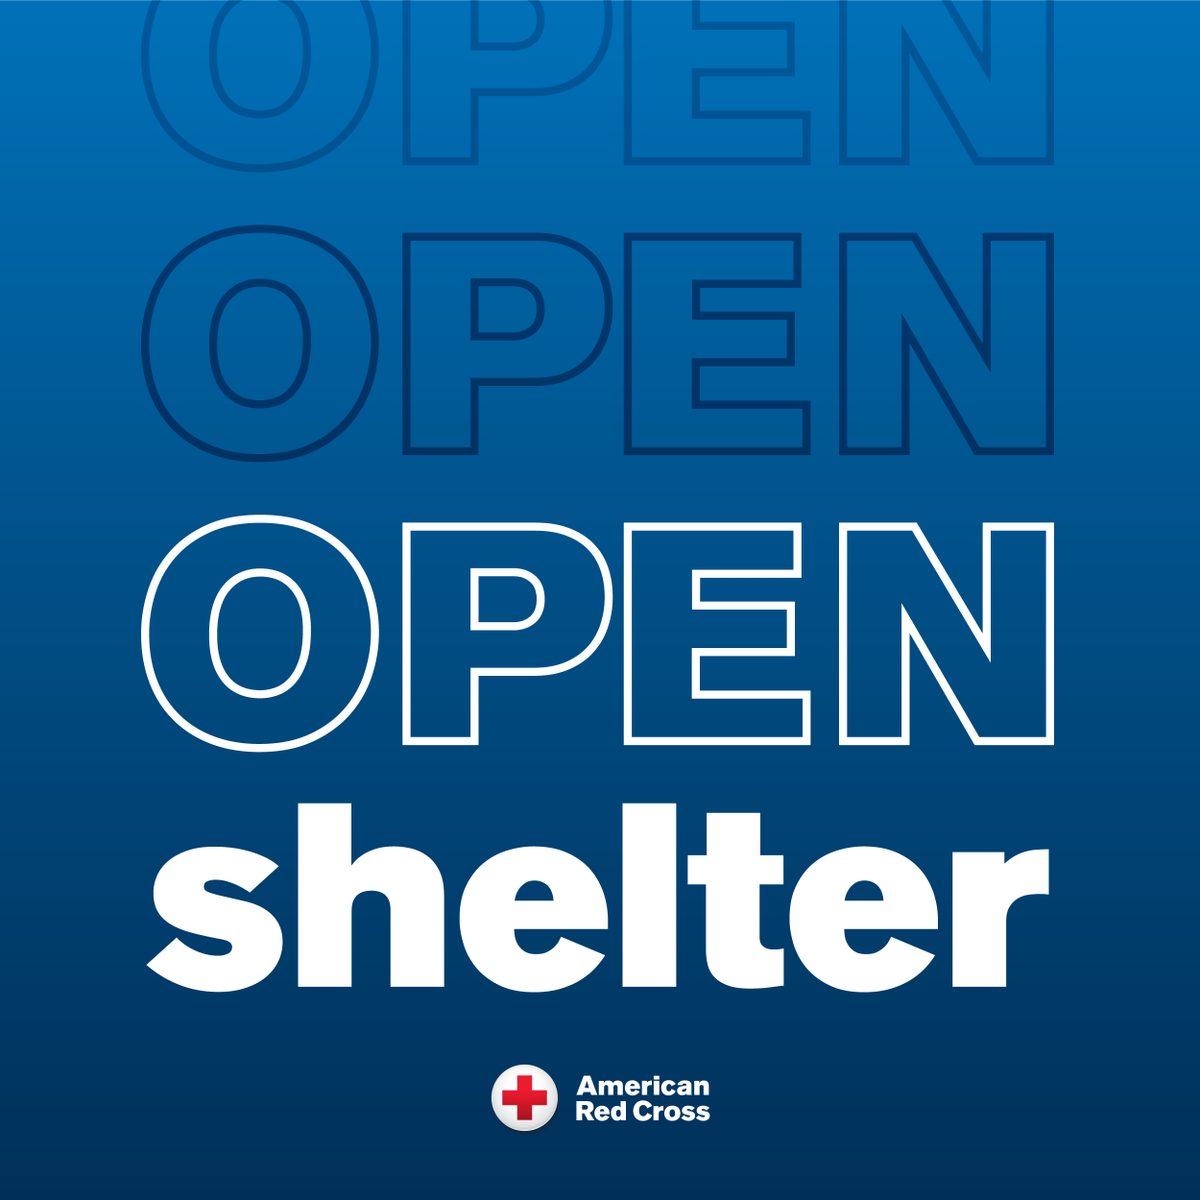 The American Red Cross is opening an emergency shelter at the Tuolumne County Enrichment Center, 101 Hospital Rd, Sonora, CA, 95370. The shelter will open in response to a power outage impacting 5,000 homes. All are welcome at our shelters.